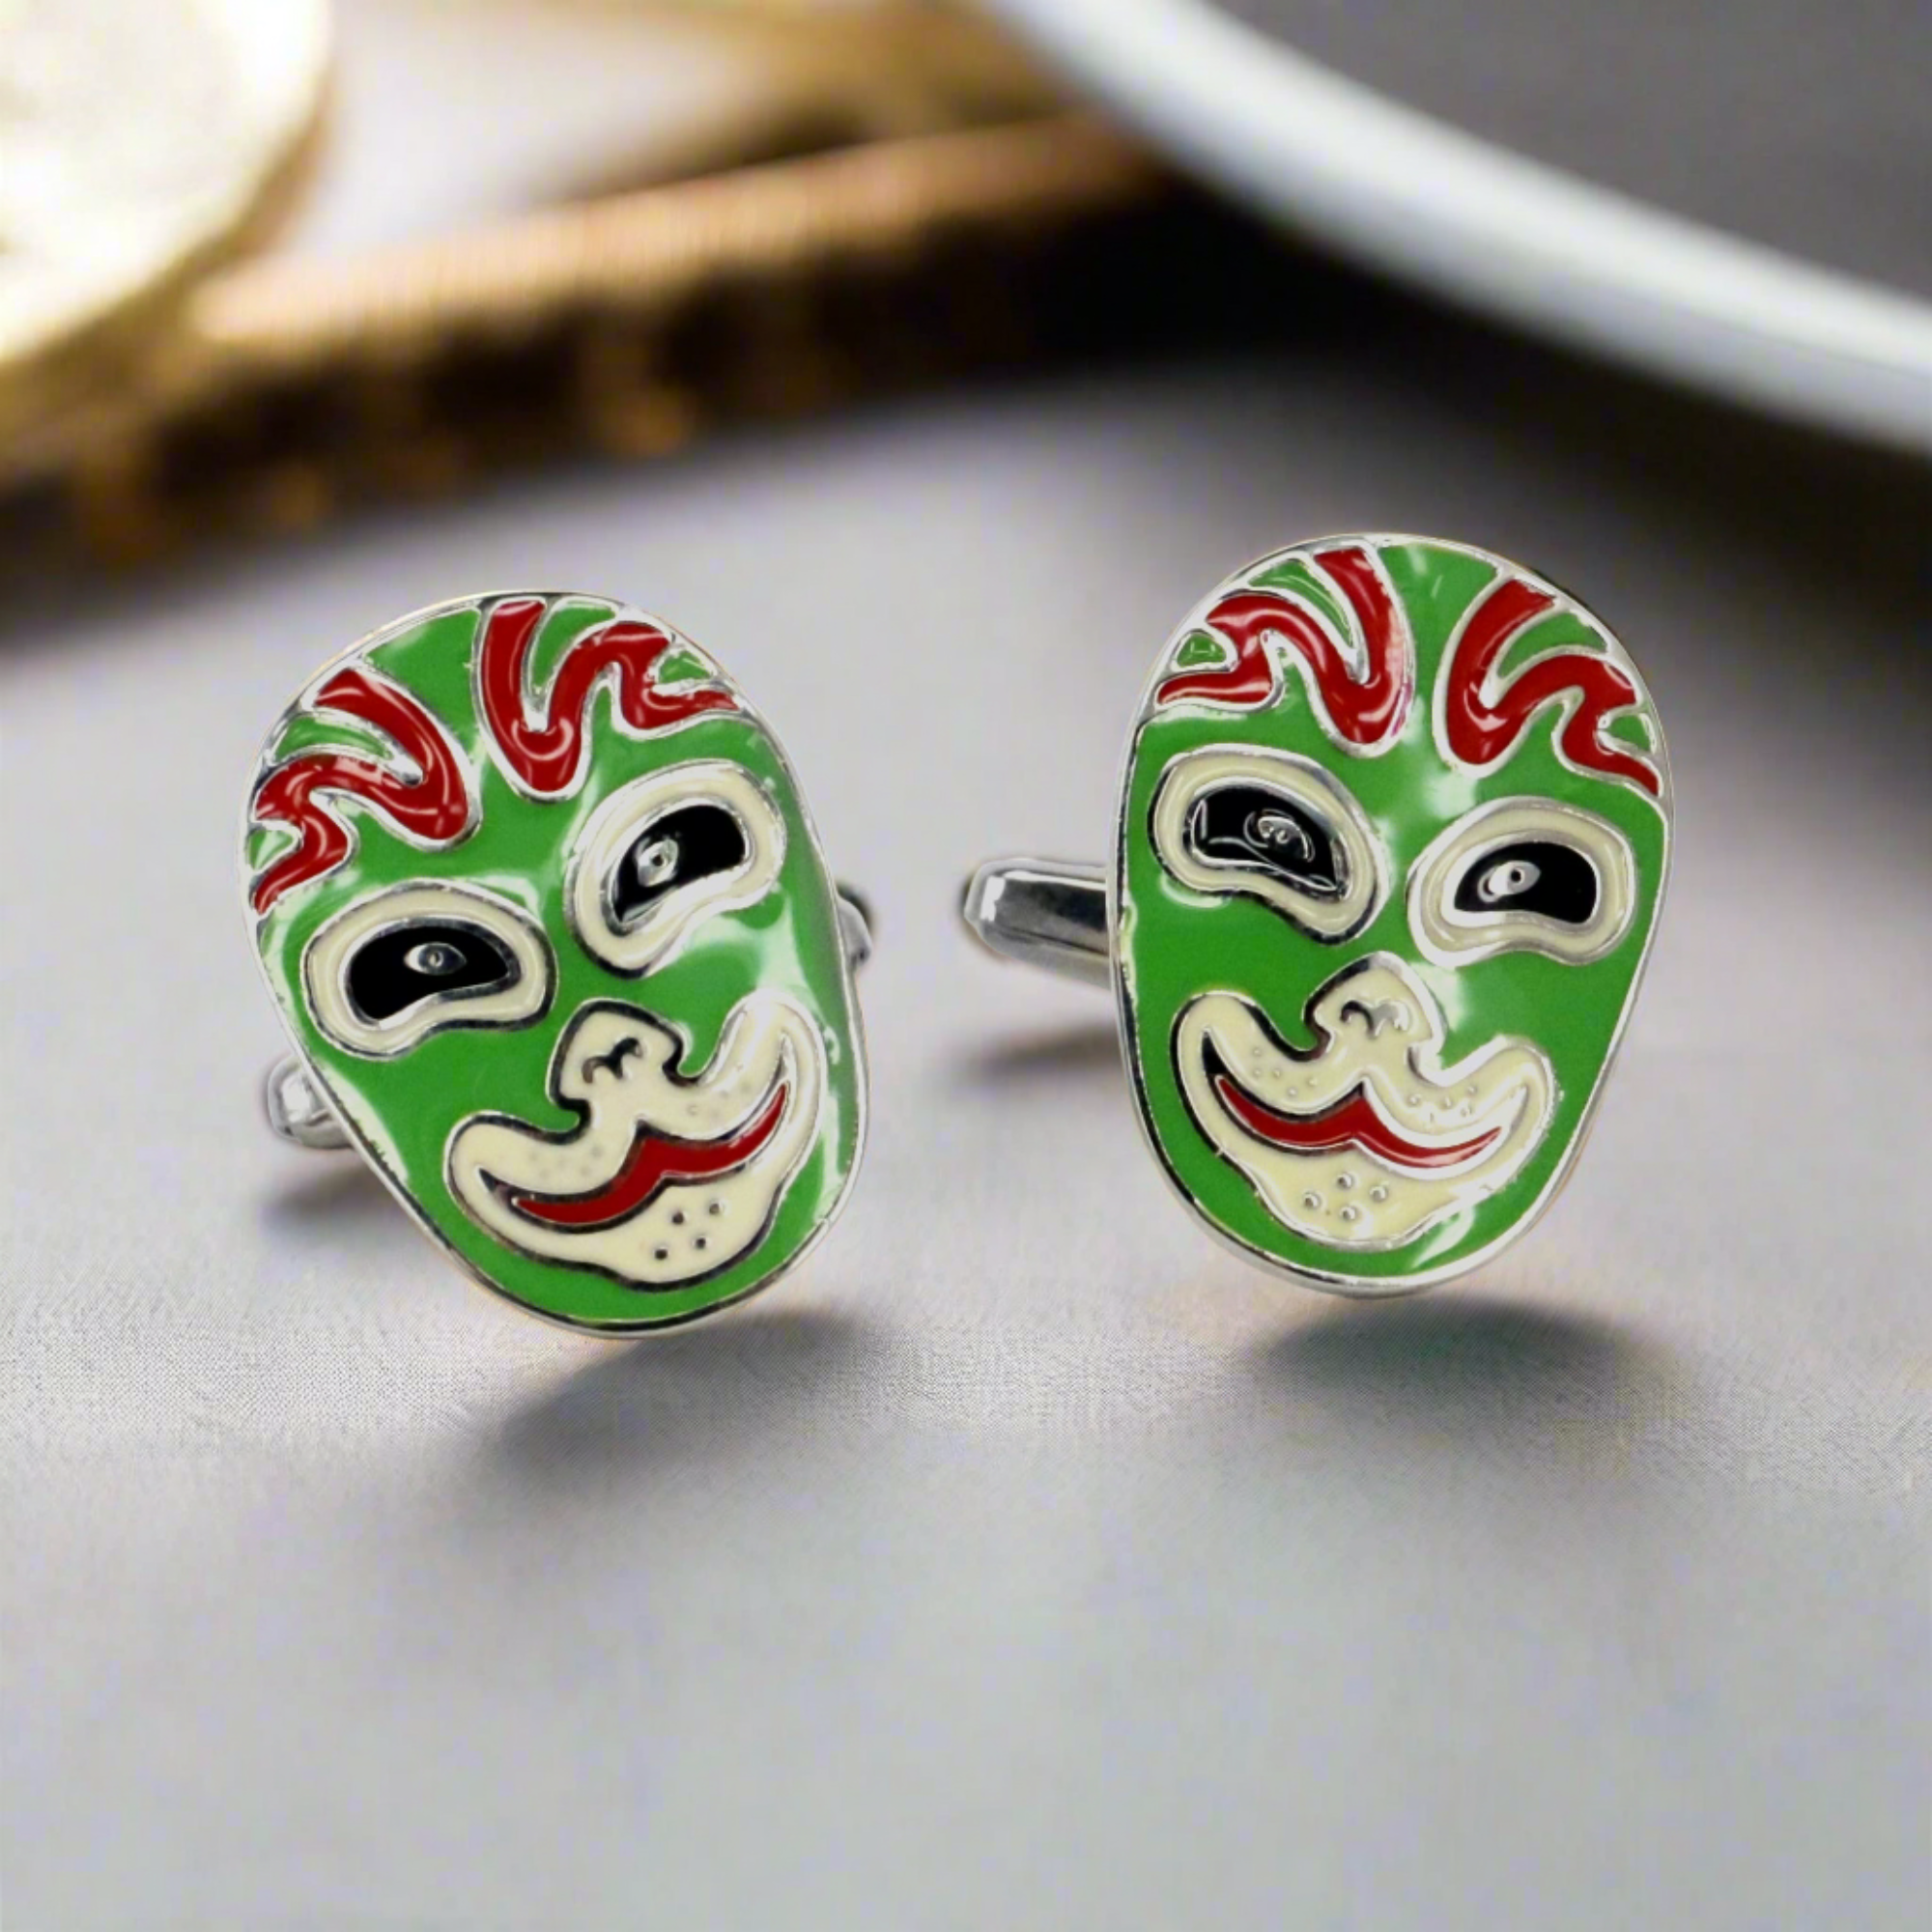 Jing Mask or Chinese Opera mask Cufflinks (Online Exclusive)